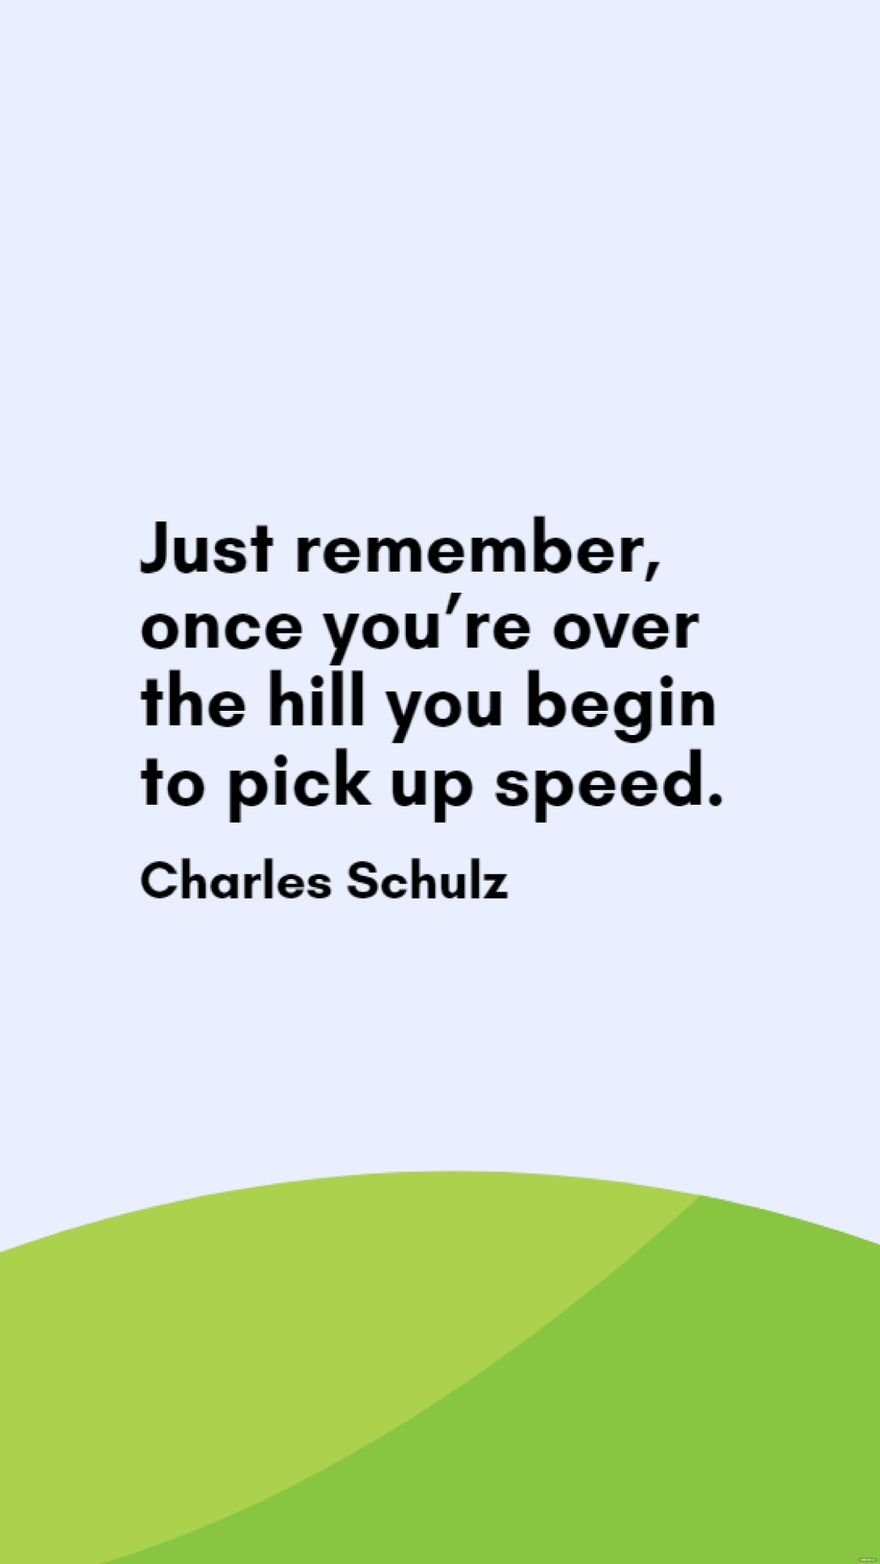 Free Charles Schulz - Just remember, once you’re over the hill you begin to pick up speed.